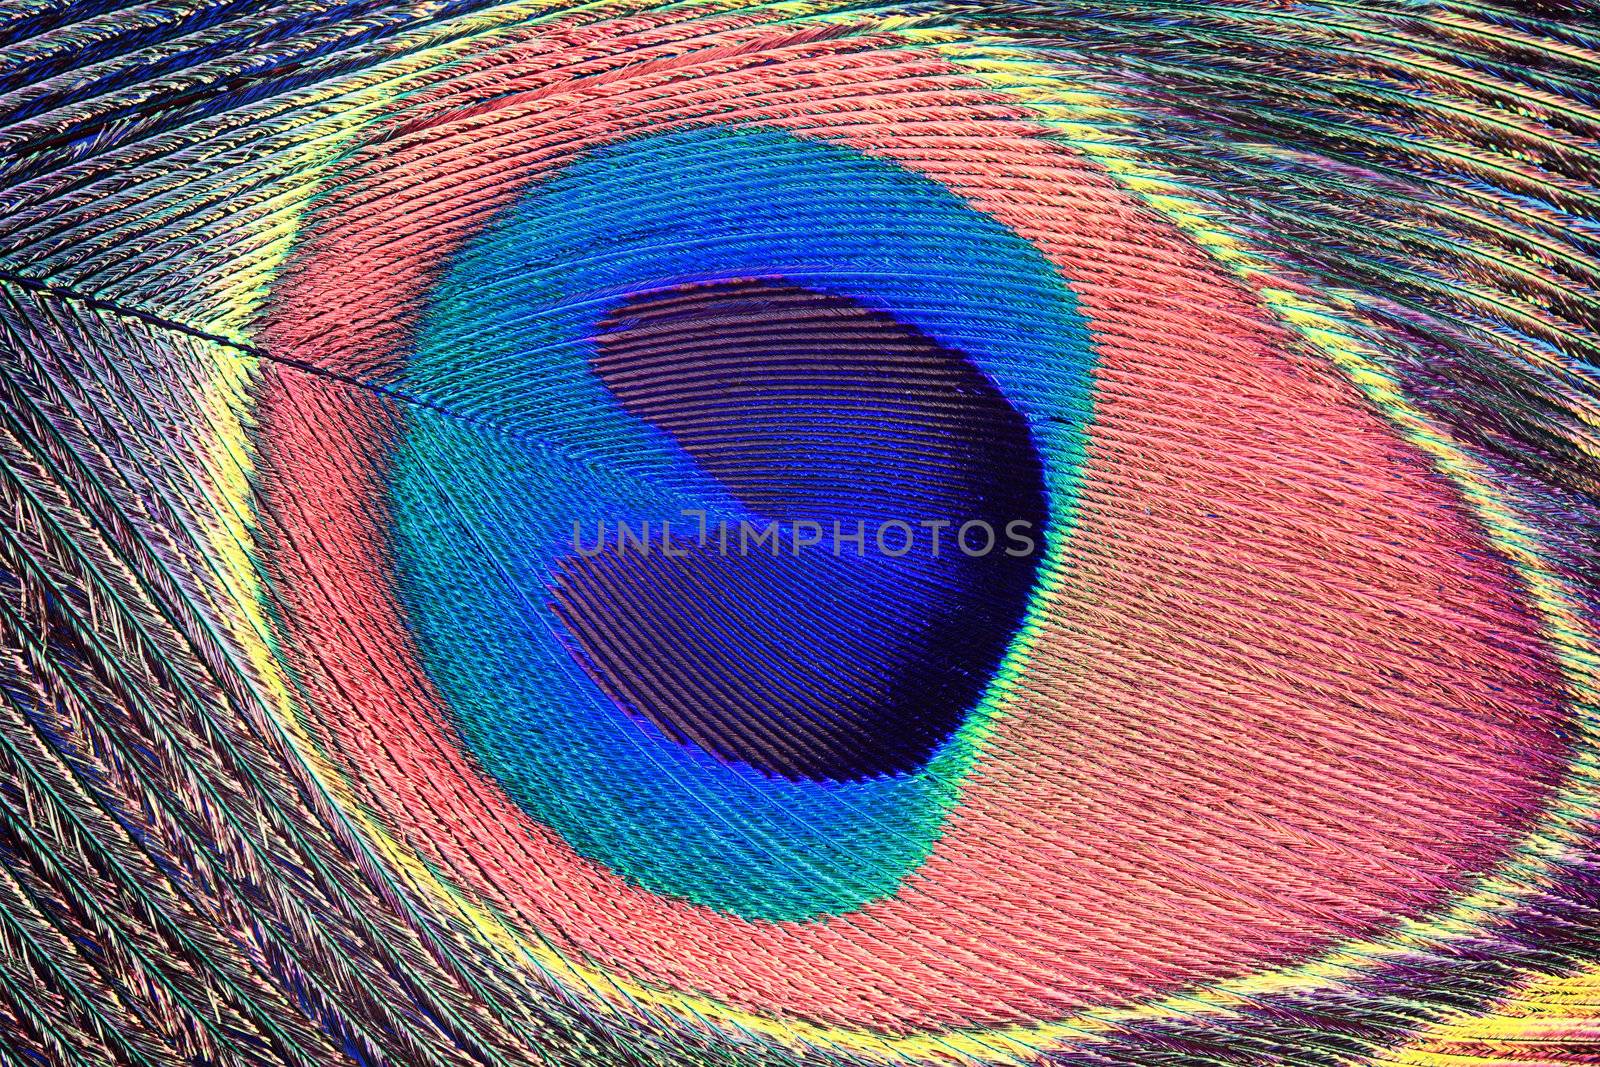 Extreme macro of a Peacock feather.
